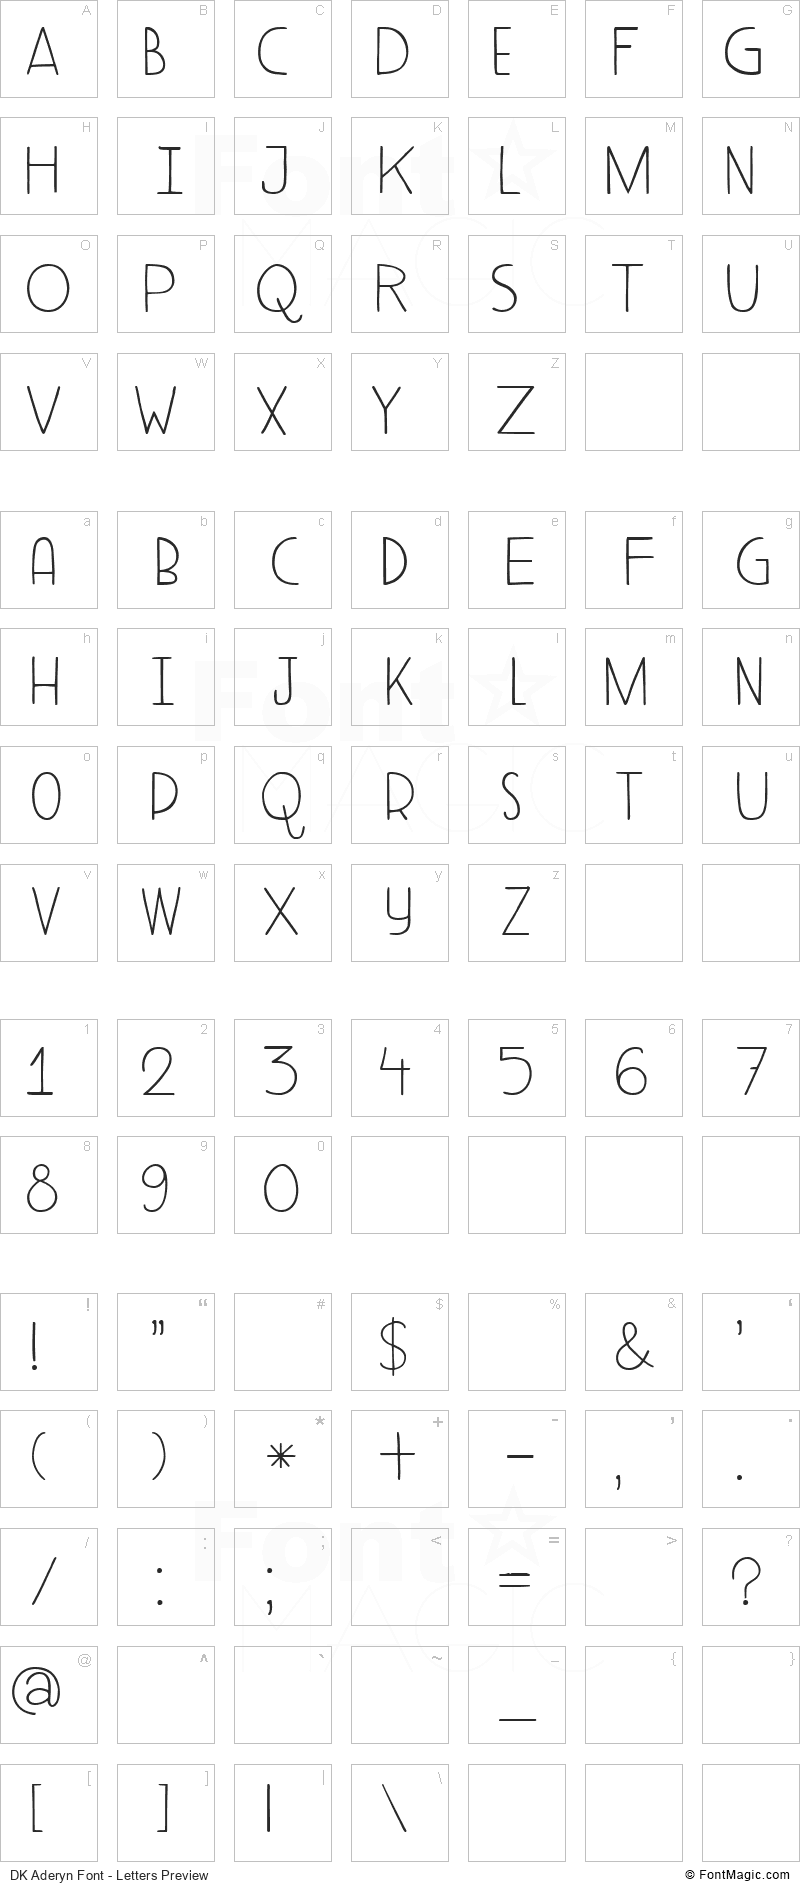 DK Aderyn Font - All Latters Preview Chart